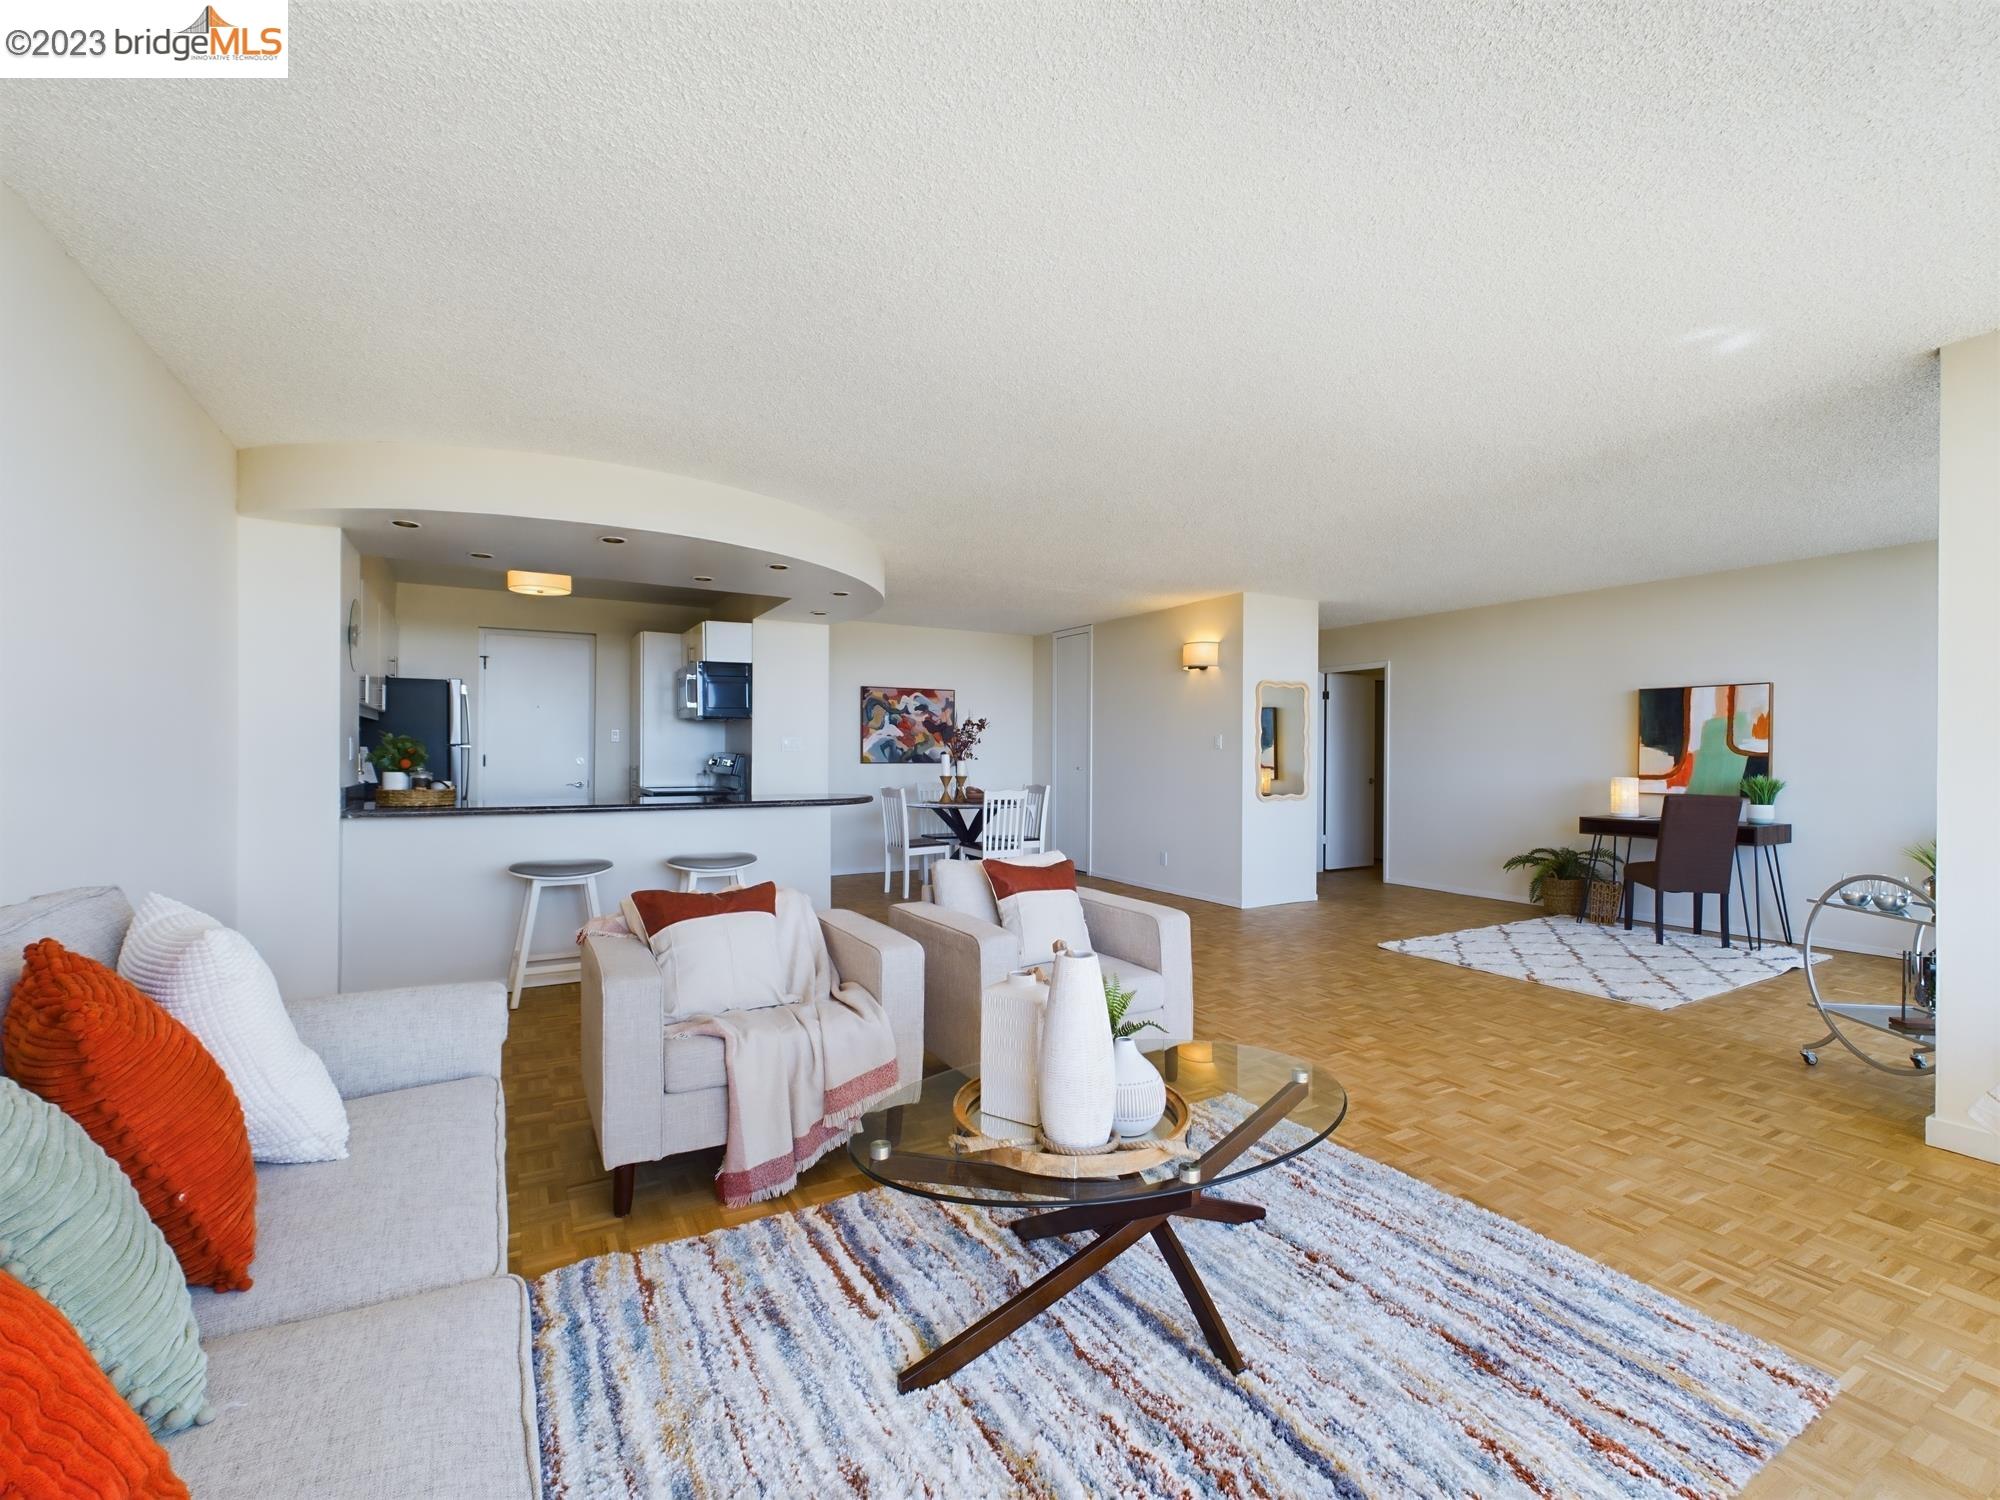 Located in the coveted, mid-century Van Buren Tower in the desirable Adams Point neighborhood of Oakland, this spacious, luxurious condominium is a rare gem. High above Lake Merritt on the 11th floor, this South-facing unit is open, bright, and filled with natural light. Enjoy the breath-taking, floor-to-ceiling views of the Lake, Downtown, the Bay, and even the Peninsula from every room.  The large living area, complemented by an ample balcony creates a seamless indoor-outdoor flow. It’s truly perfect for taking in the stunning sunsets, city lights, and broad high-rise views. The bedrooms, too, share their own balcony areas - perfect for a private read or relaxing moment. The unit also features a primary bedroom with a sizable en-suite full bath, a second bedroom and a second full bath for guests. The refreshed kitchen and baths; refinished white oak flooring; open layout; and generous storage make it ready to be your stress-free retreat!  Also offered at Van Buren, a gated garage with an assigned parking space; community, app- driven laundry facilities; electronically keyed and coded elevators; on-site additional locked storage; common area lobby and outdoor terraces; and gated bike storage. Plus, Van Buren Tower is pet- friendly and offers EV charging, too!